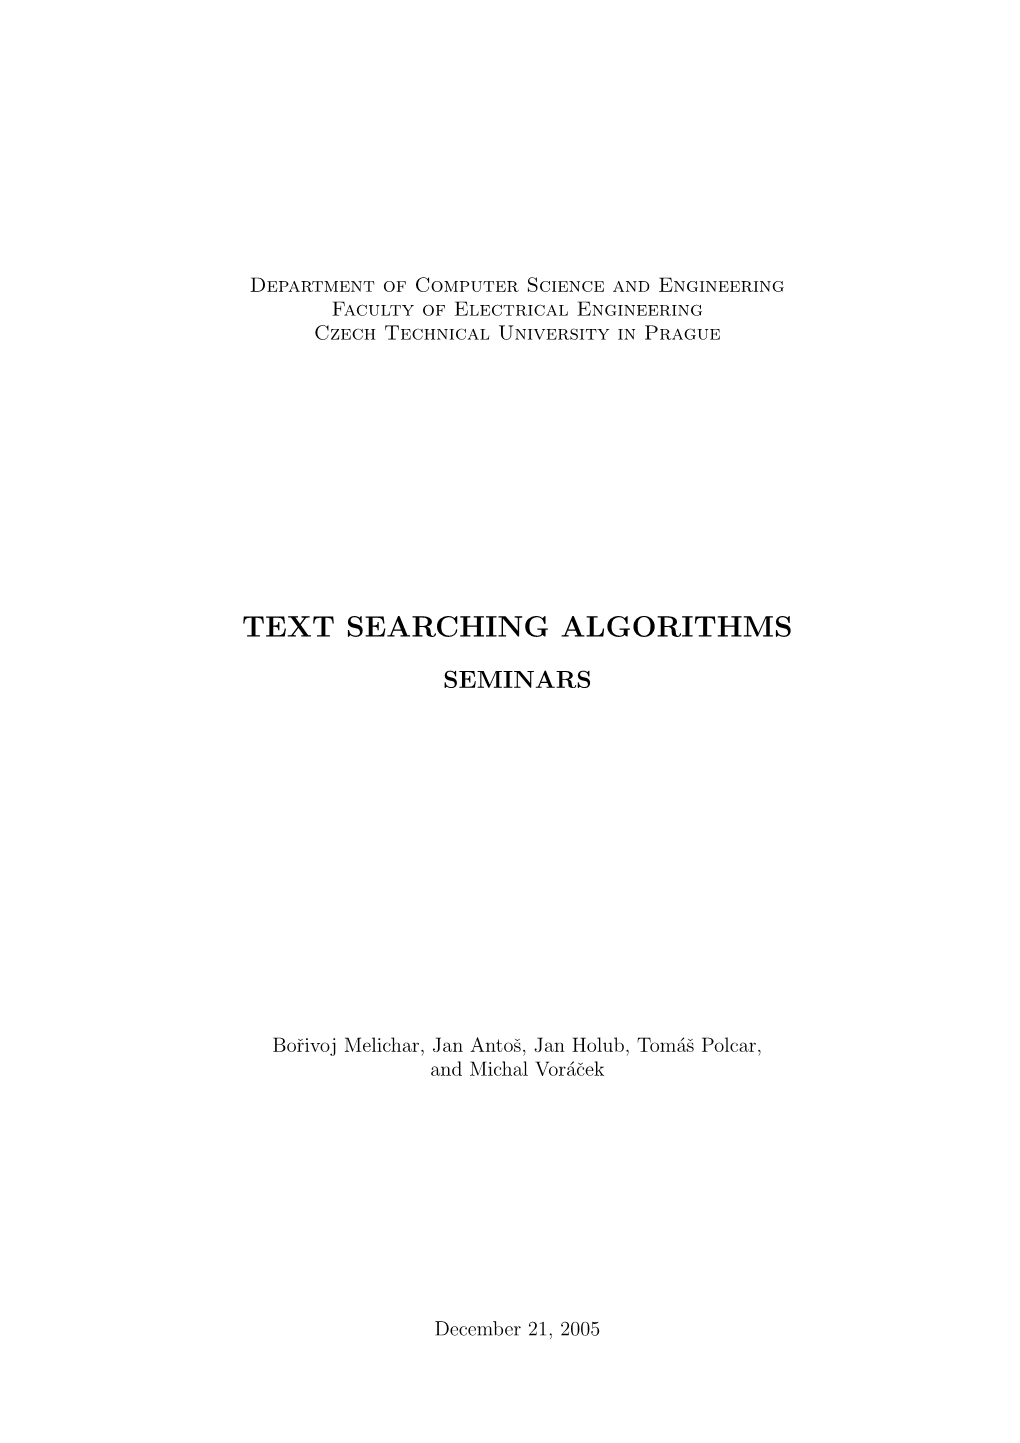 Text Searching Algorithms